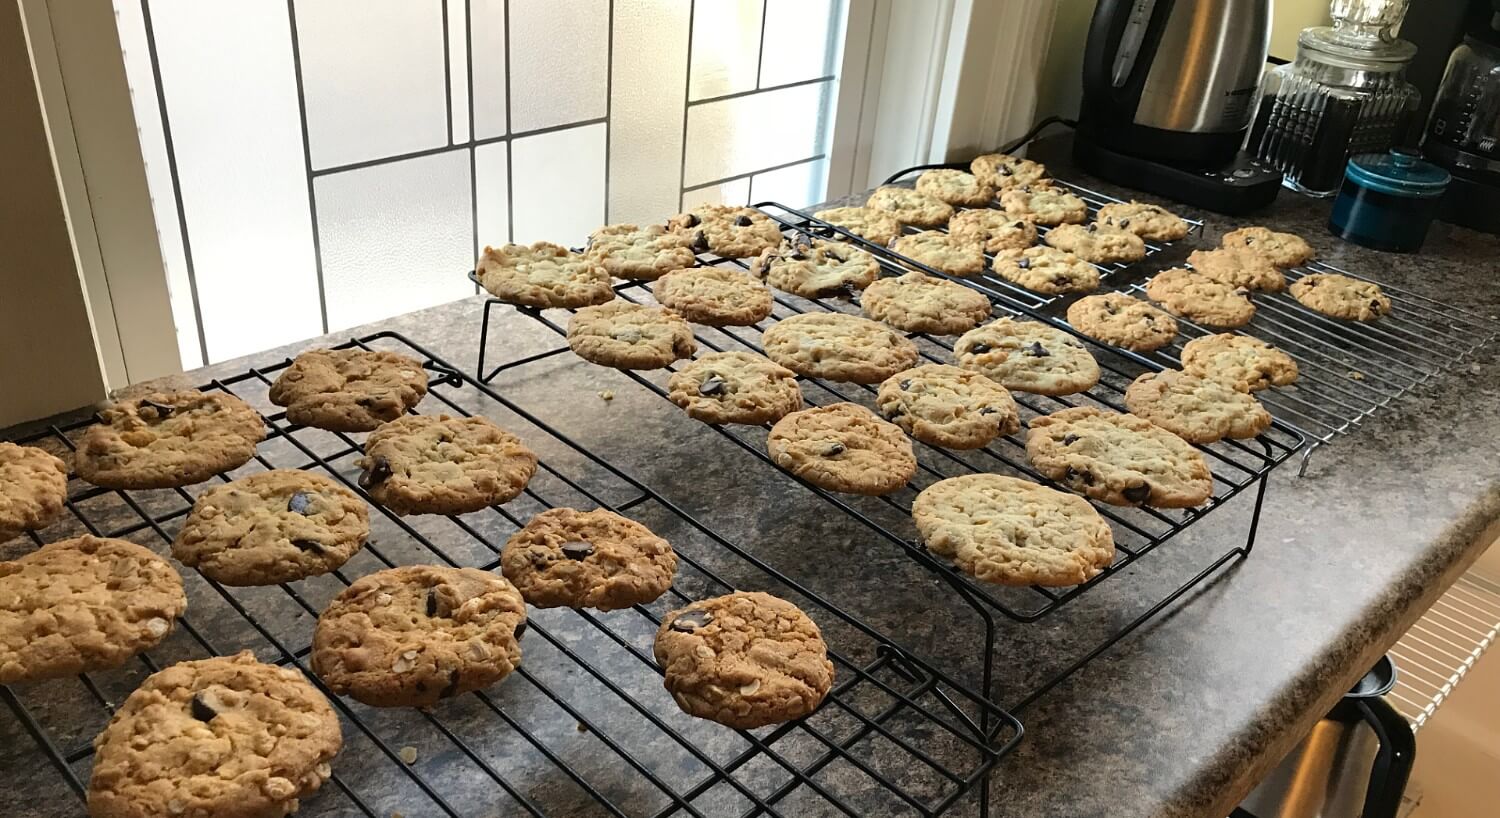 Chocolate chip cookies cooling on wire racks in front of a window.